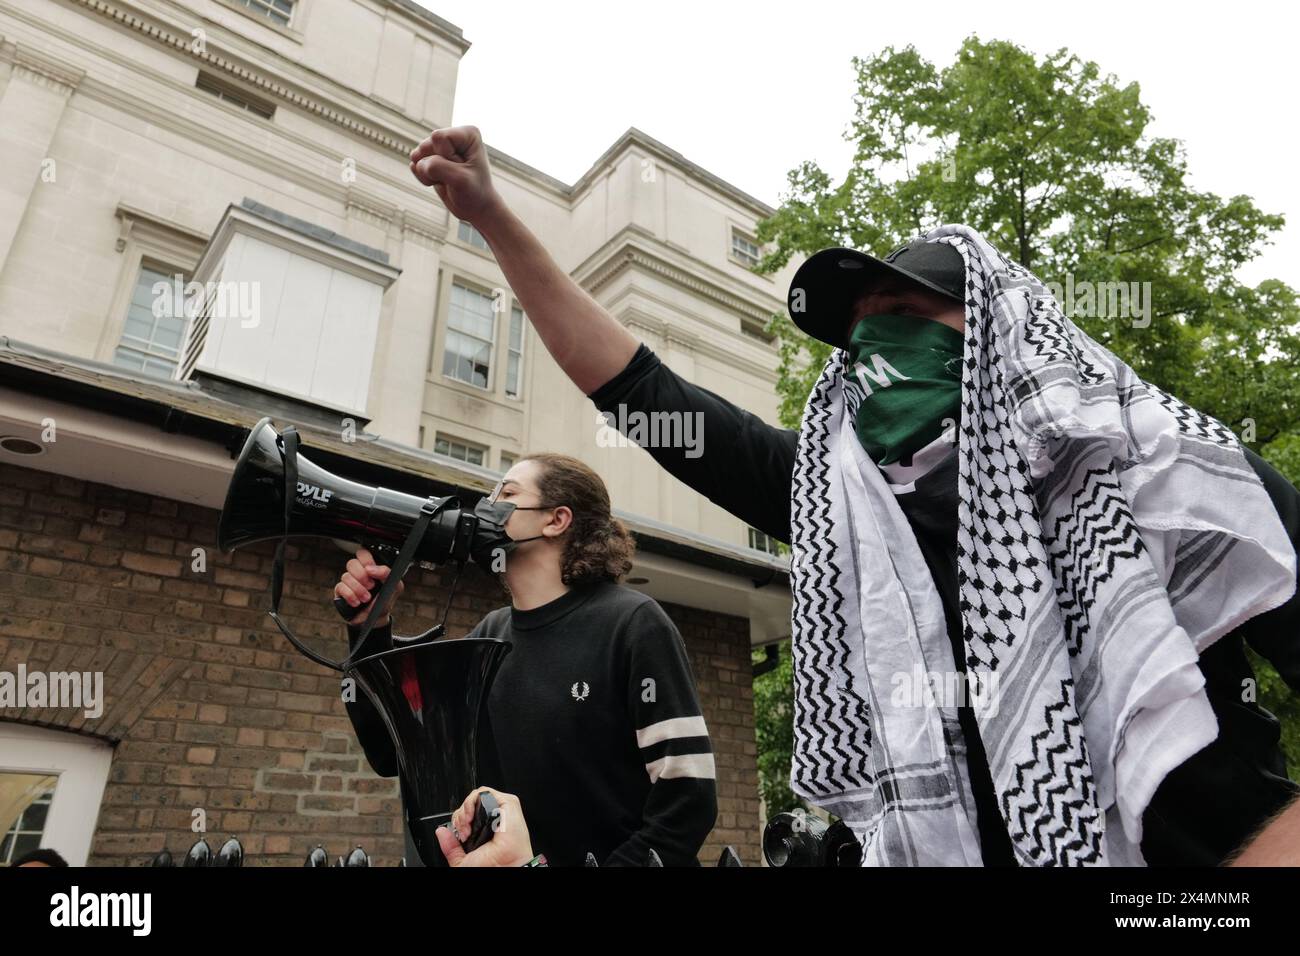 London / UK. 04 May 2024. Inspired by students across the United States, where thousands have been arrested, similar encampments have started at universities in Bristol, Manchester, and Warwick in the UK.Alamy Live News / Aubrey Fagon Credit: Aubrey Fagon/Alamy Live News Stock Photo